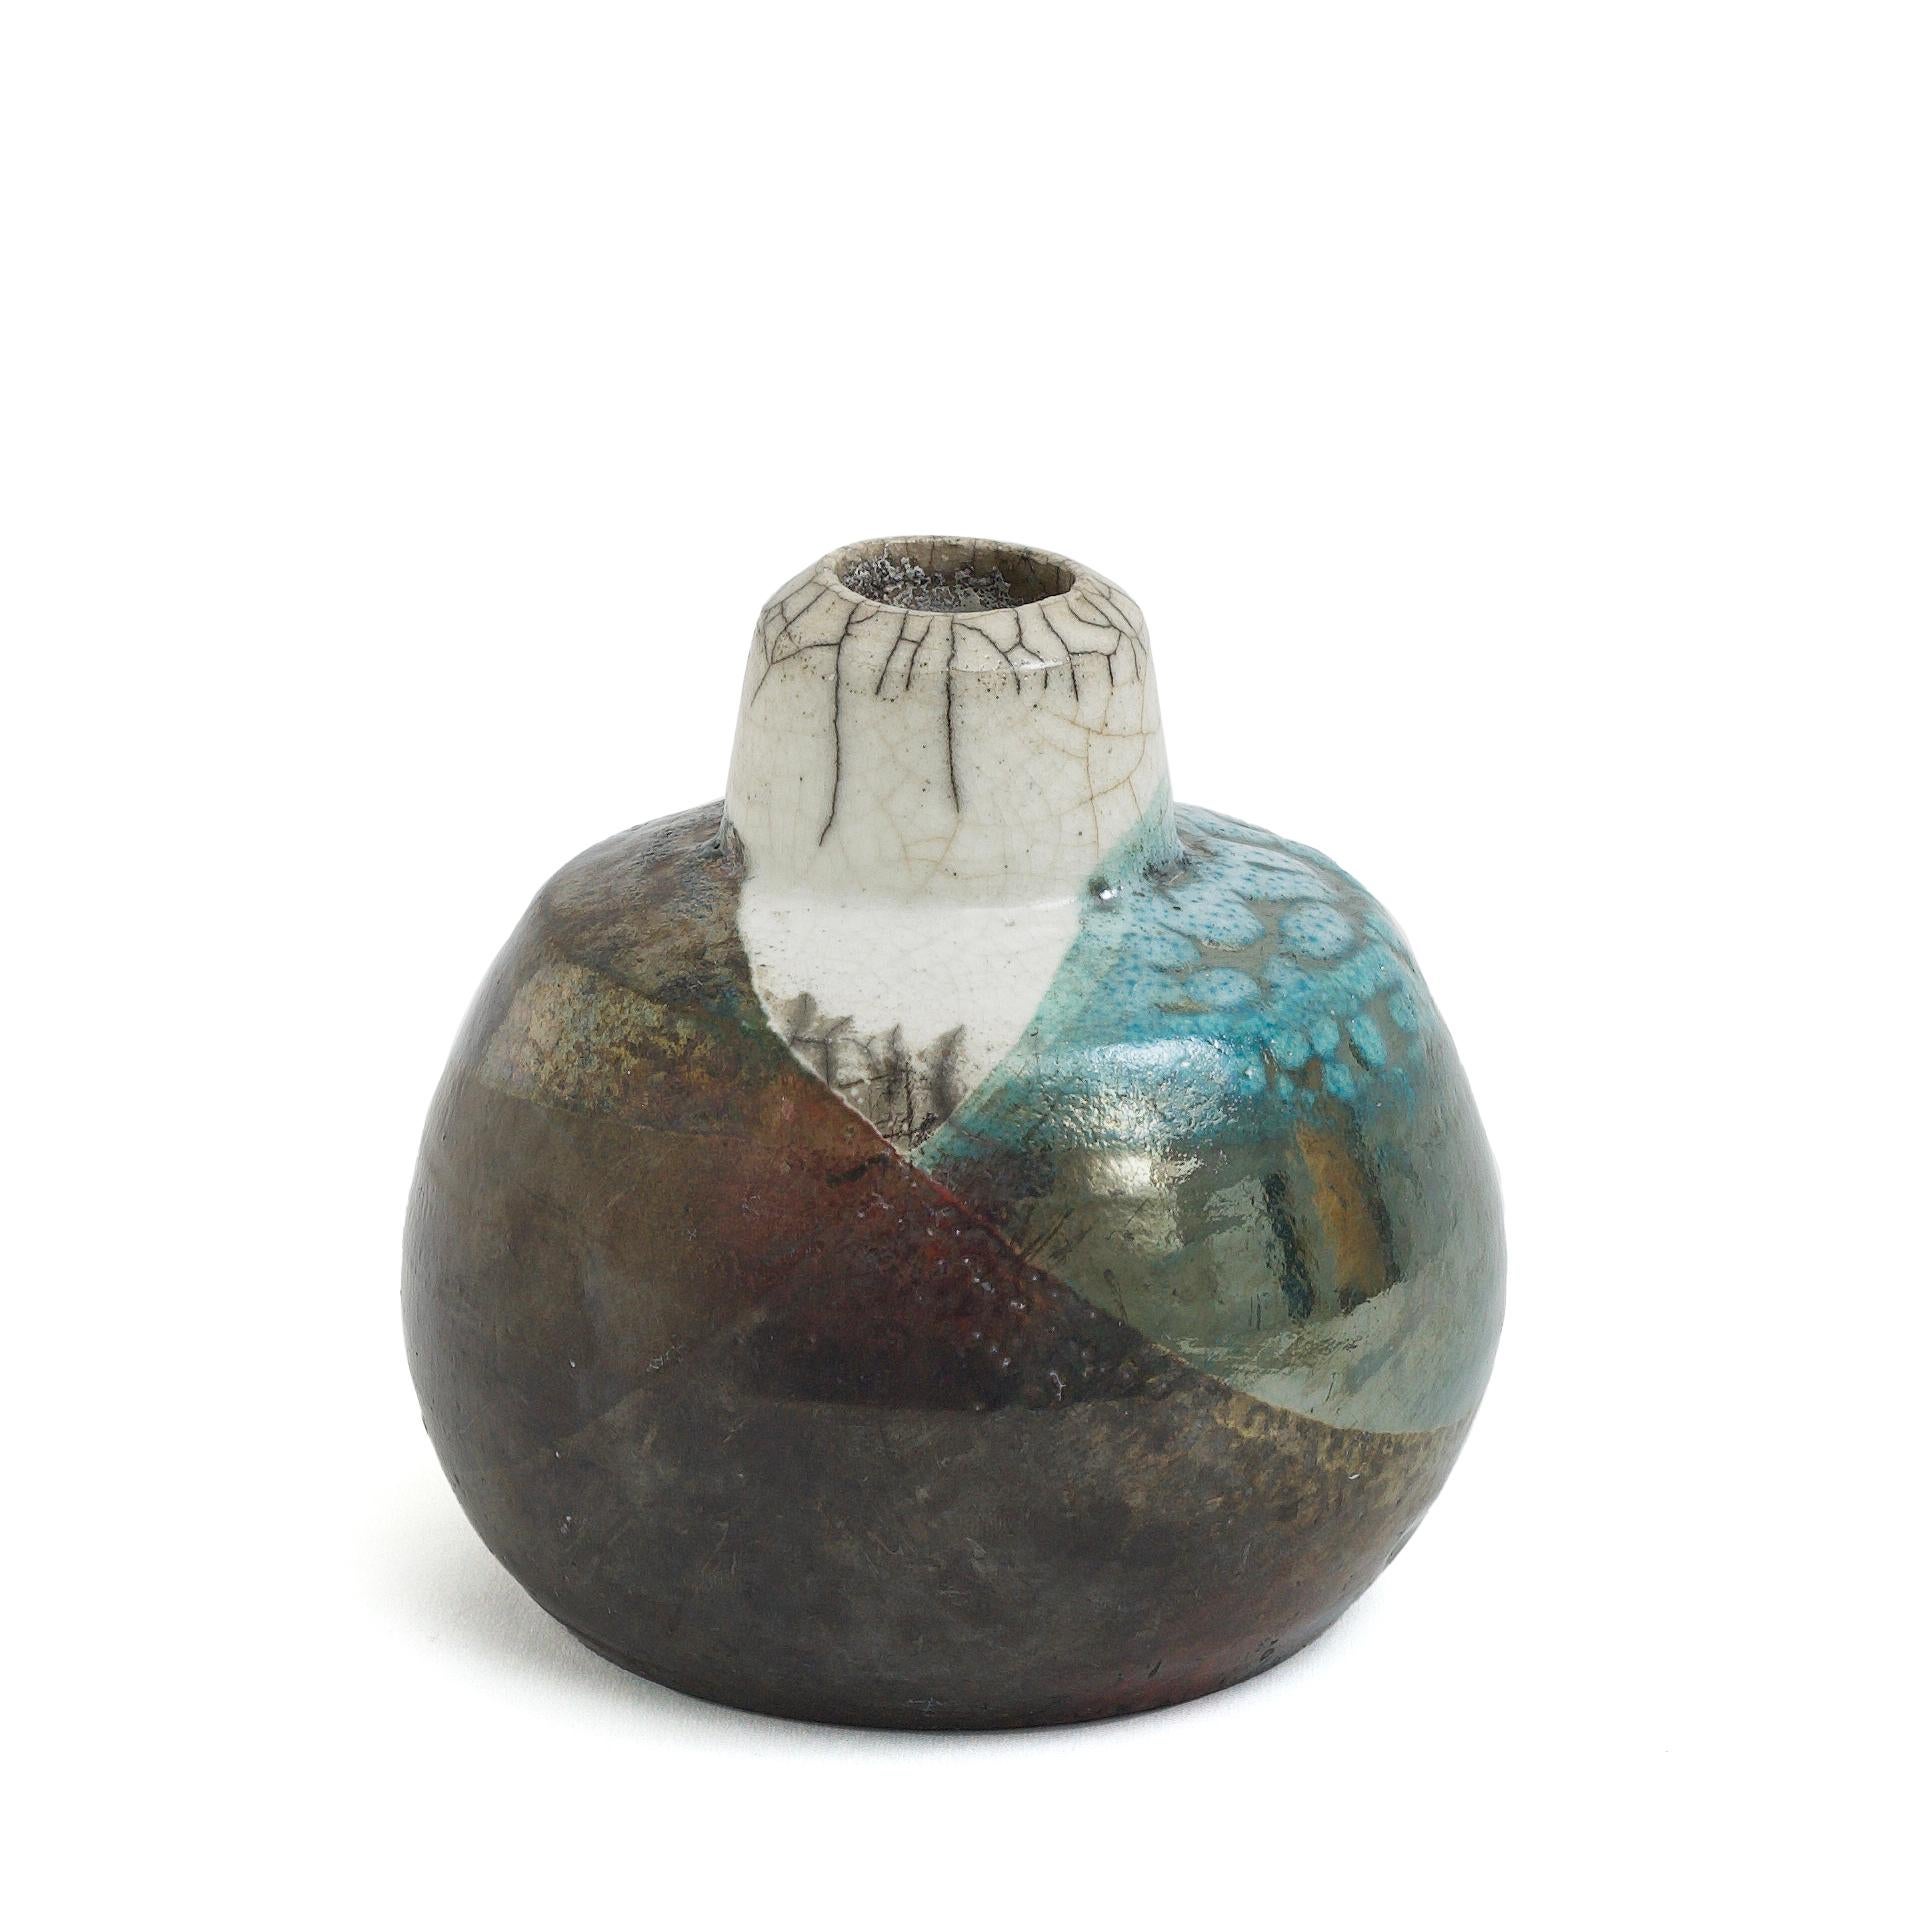 Akuma No Me vases

A combination of crackle', burnt effect and copper, derived from the raku techinque , underline the fleeting nature of the subject that has a particular effect depending on the point of view. From the top it resembles the AKUMA